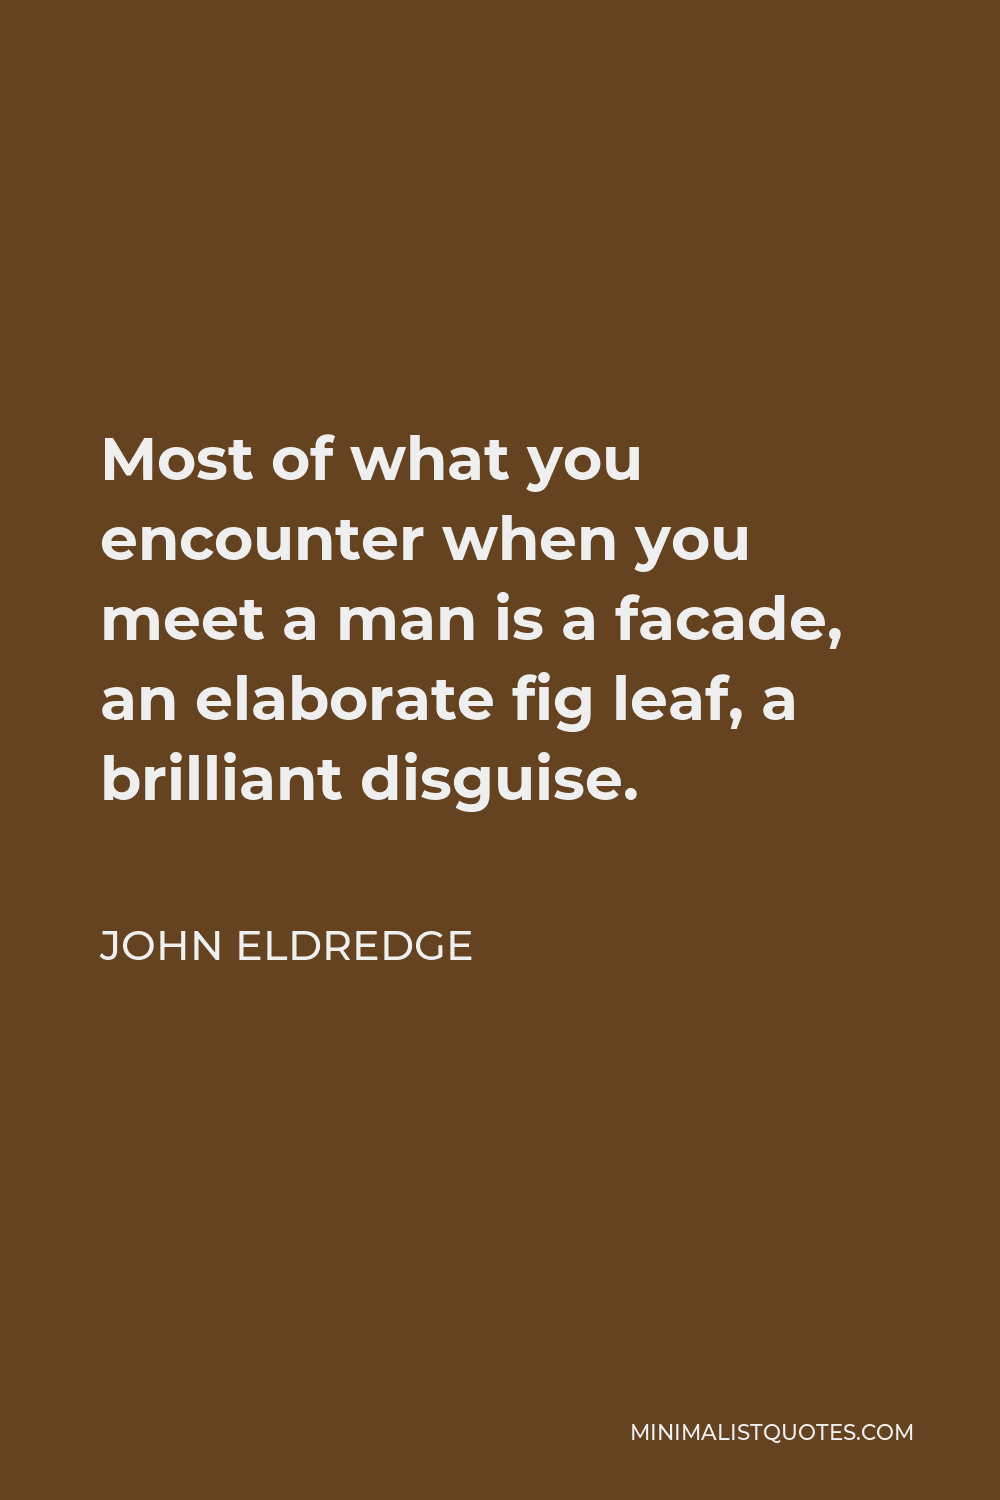 John Eldredge quote: If we can reawaken that fierce quality in a man